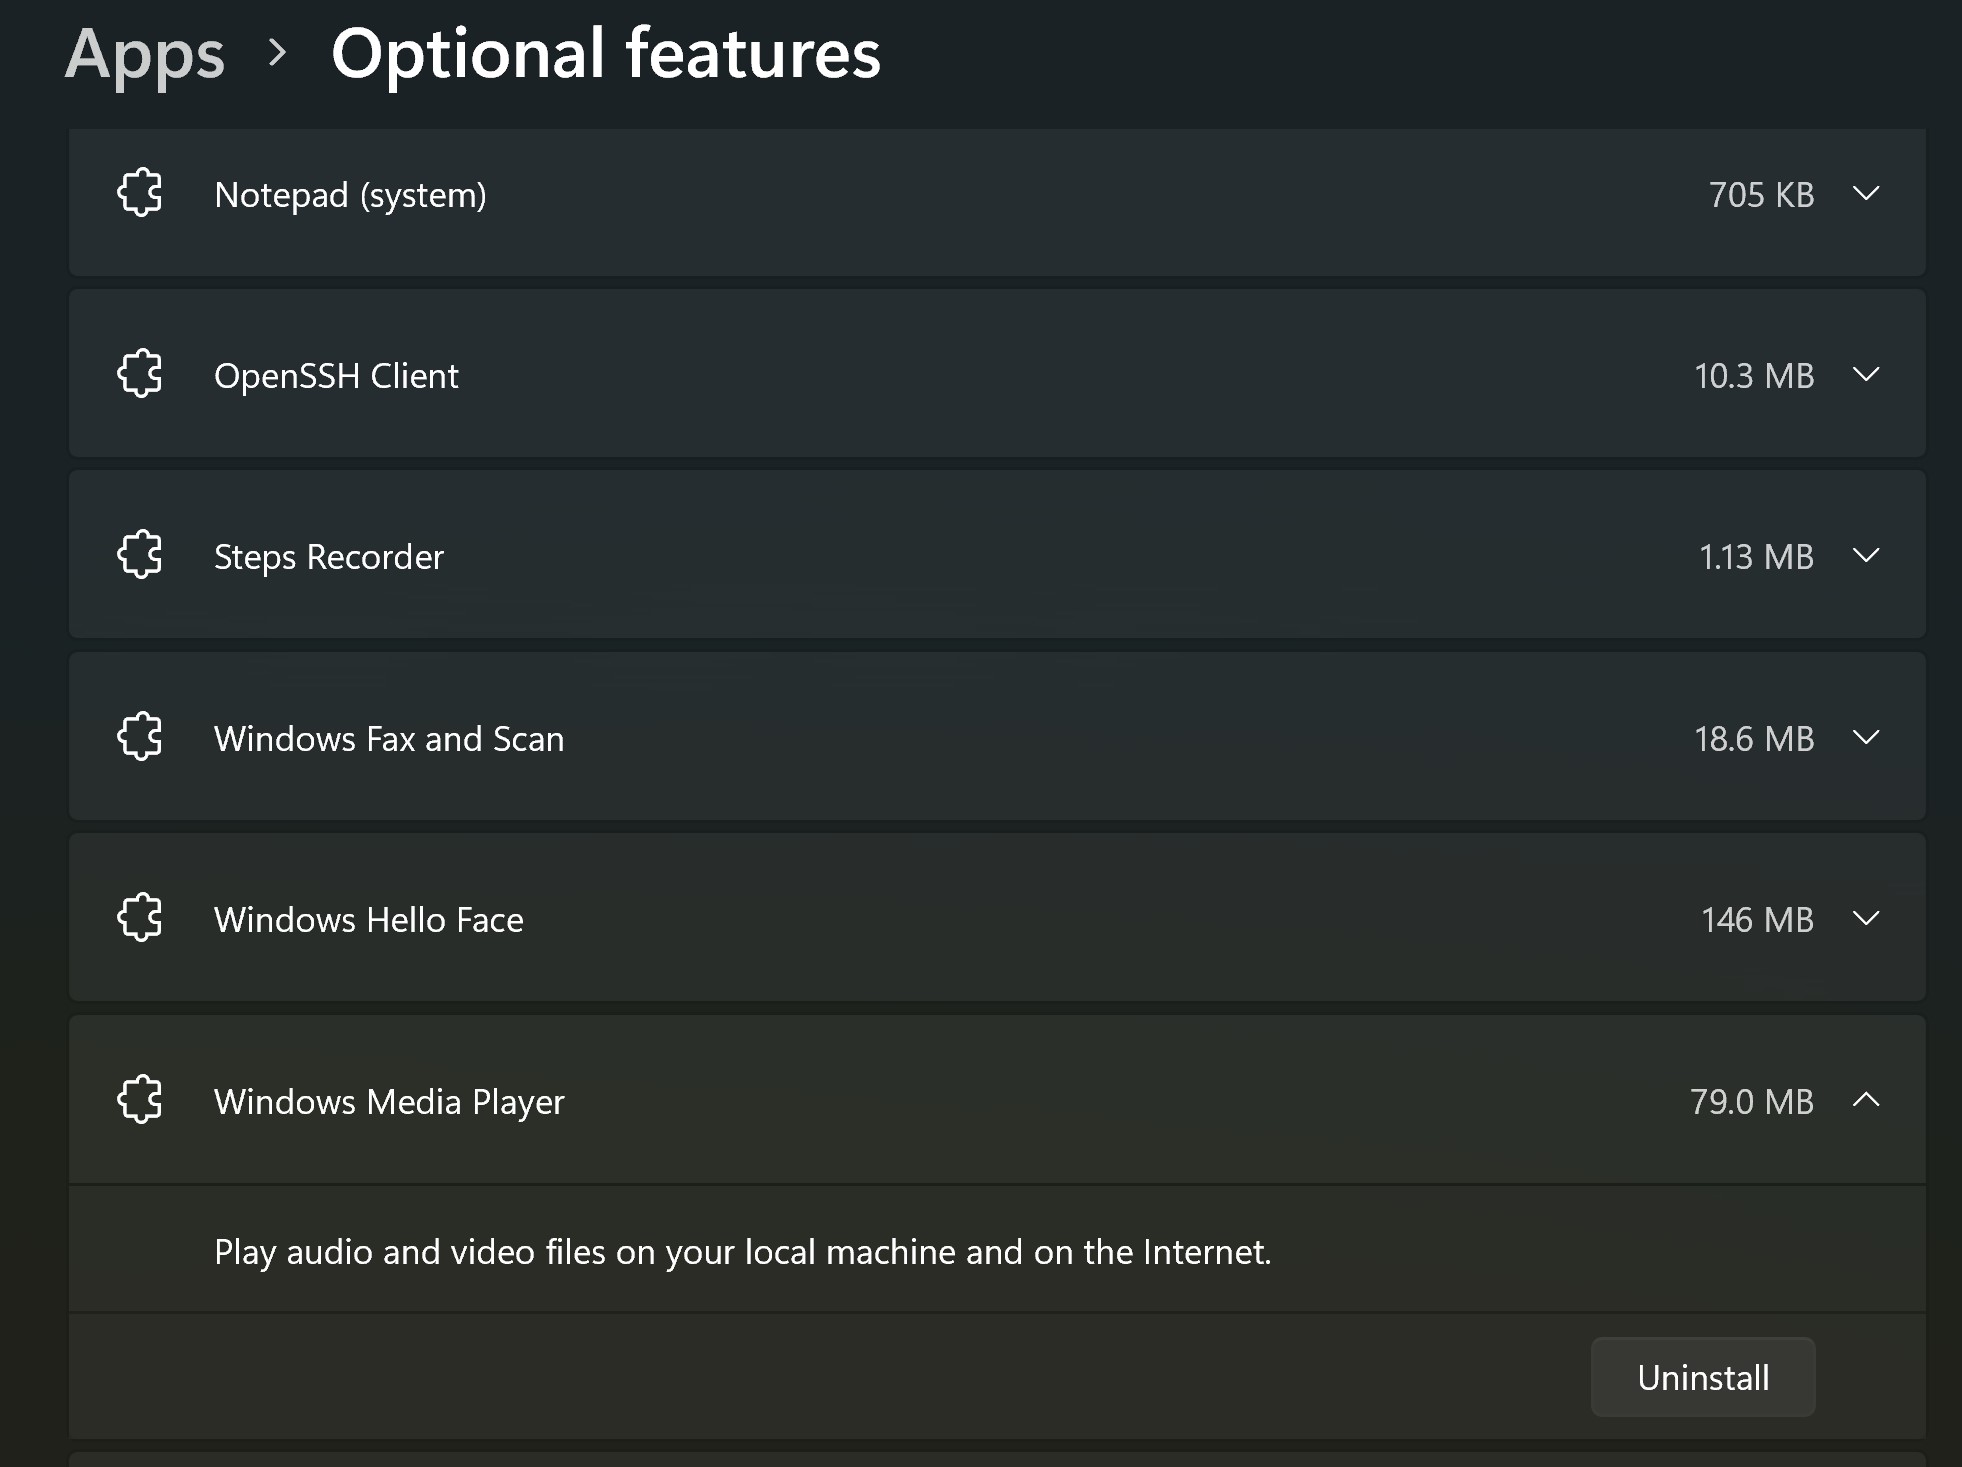 Optional features page